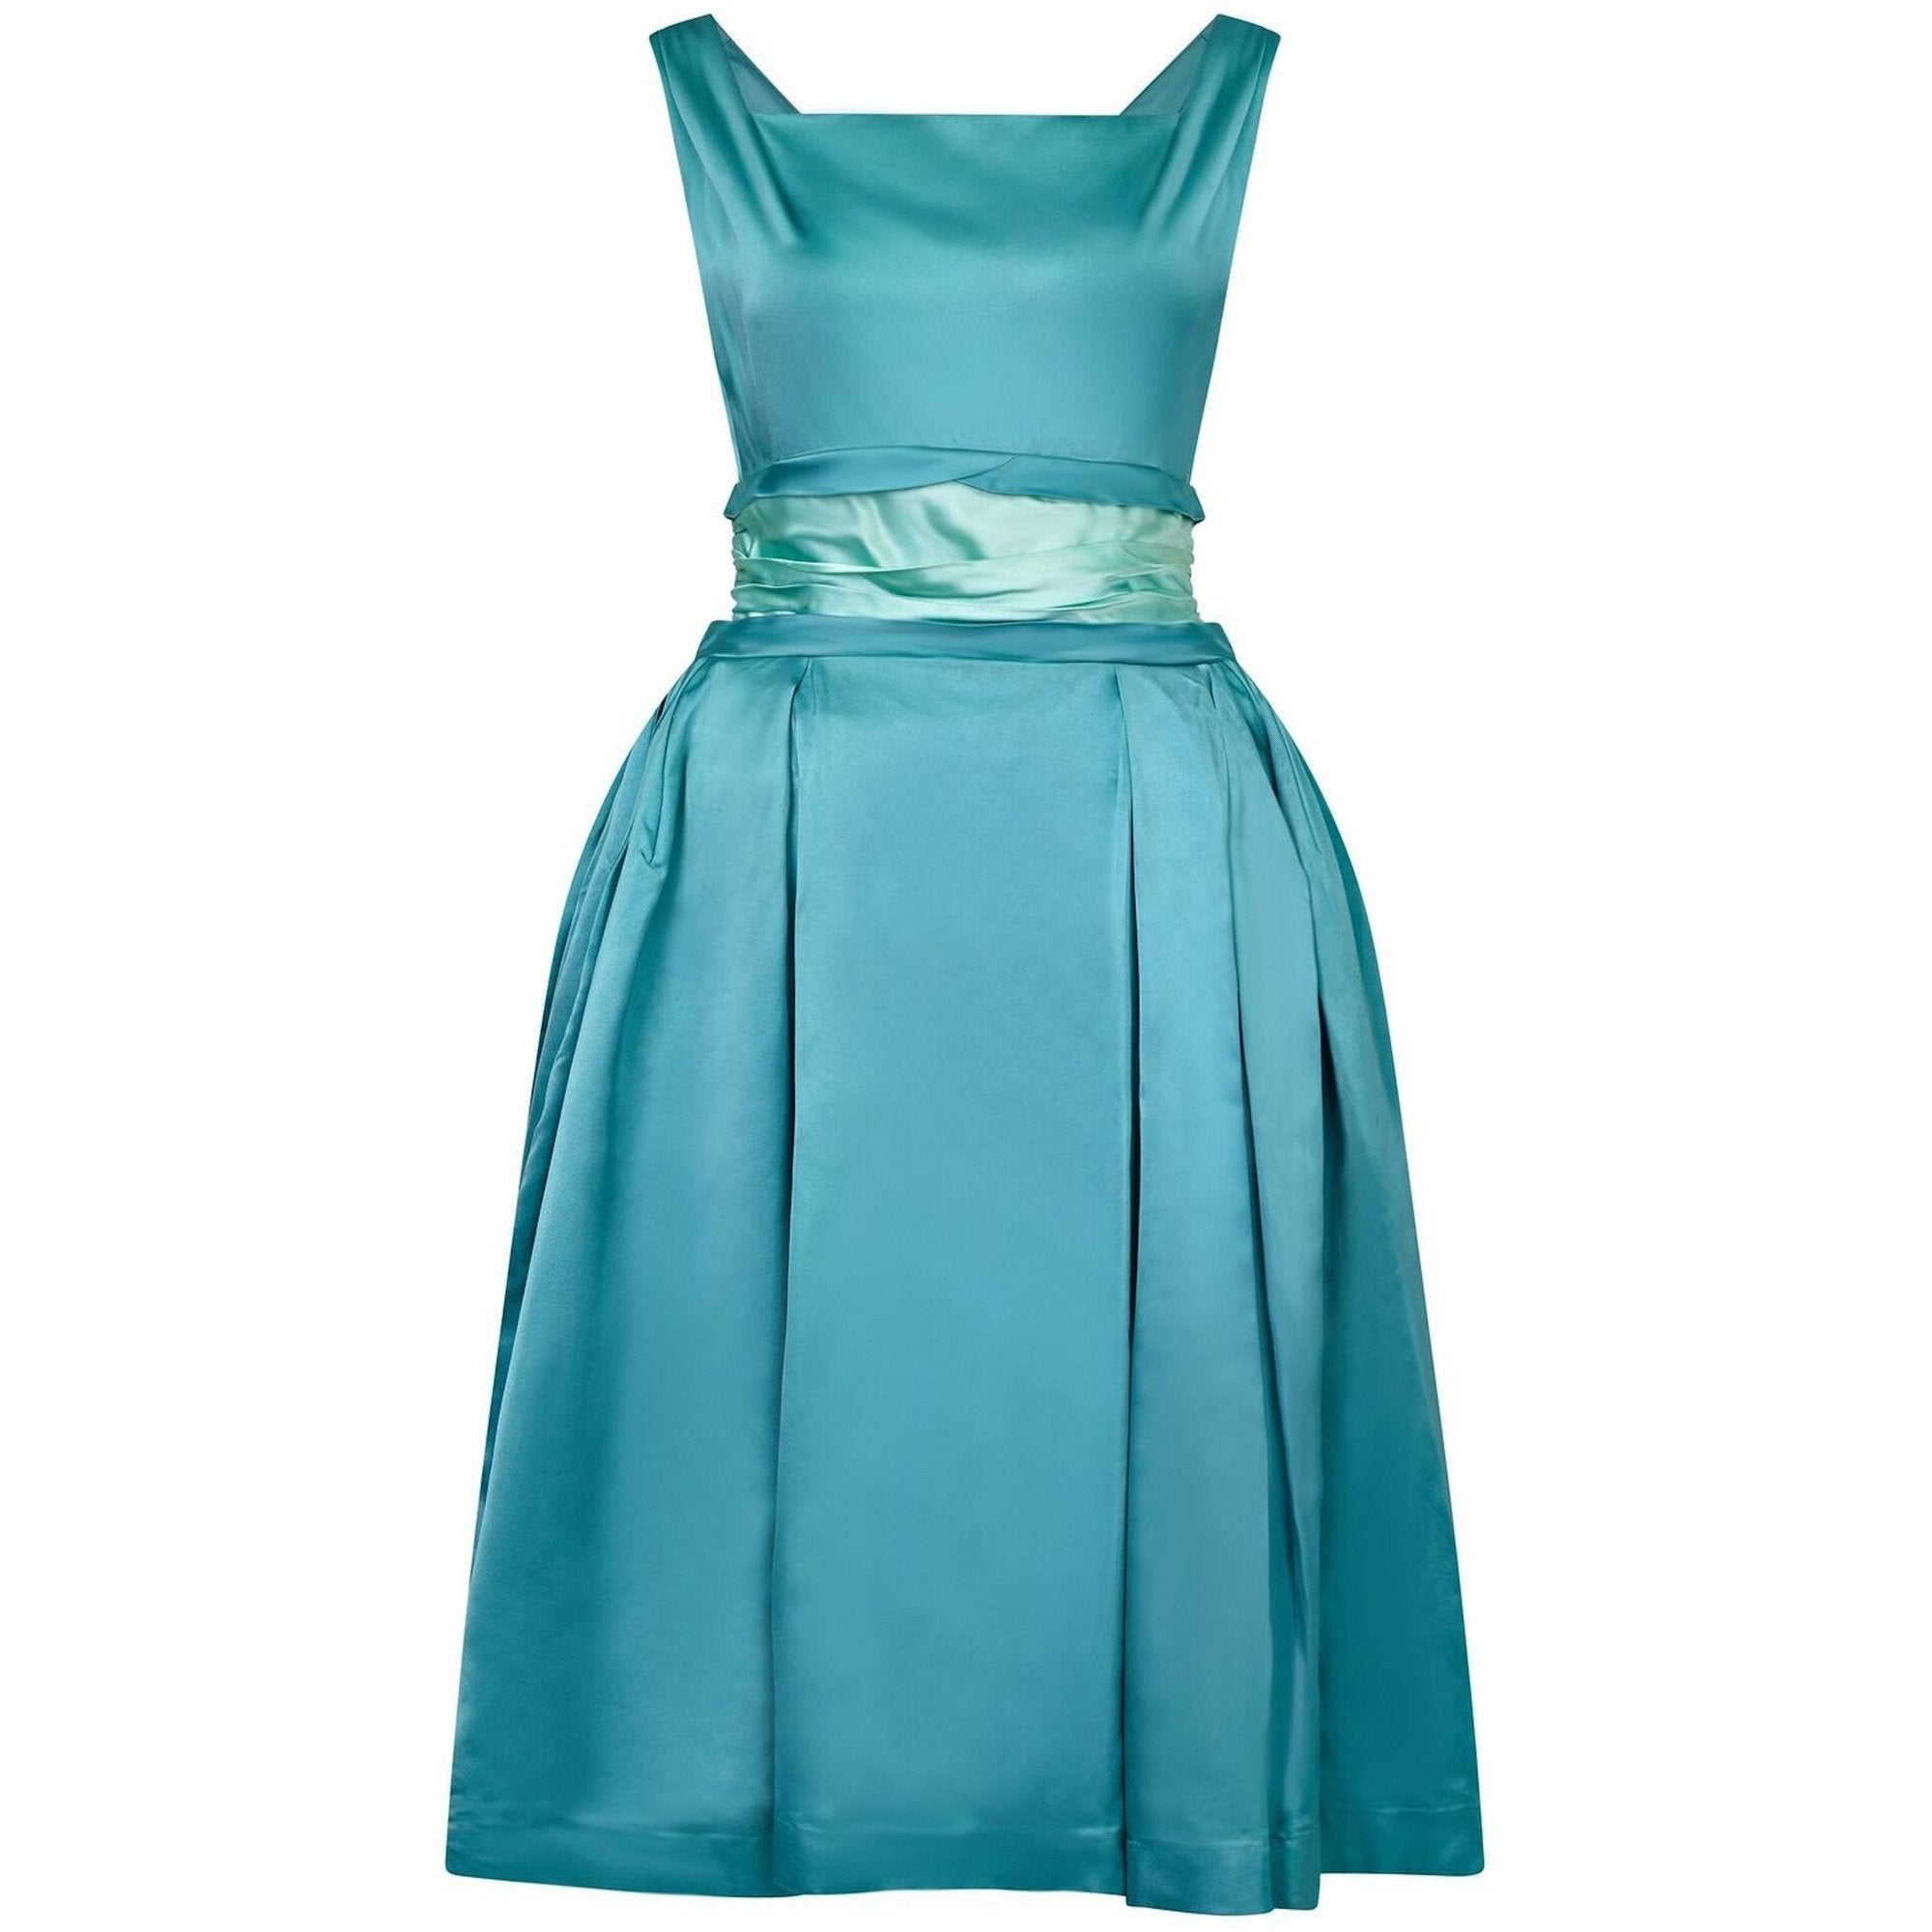 1950s Turquoise Satin Duchess Dress With Corseted Waistband